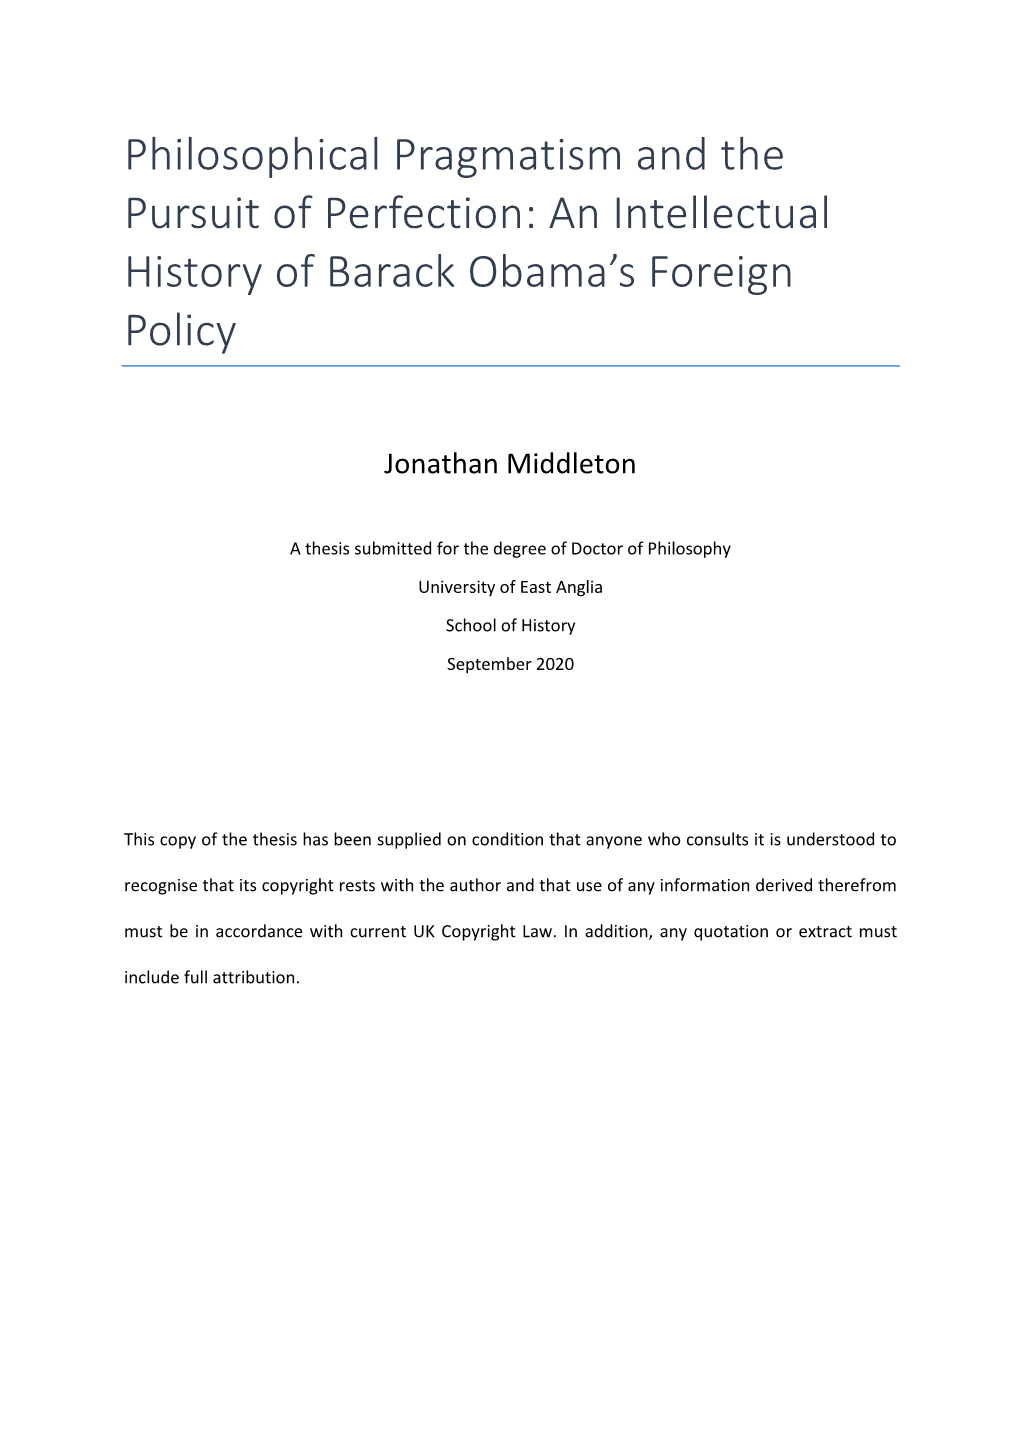 Philosophical Pragmatism and the Pursuit of Perfection: an Intellectual History of Barack Obama’S Foreign Policy